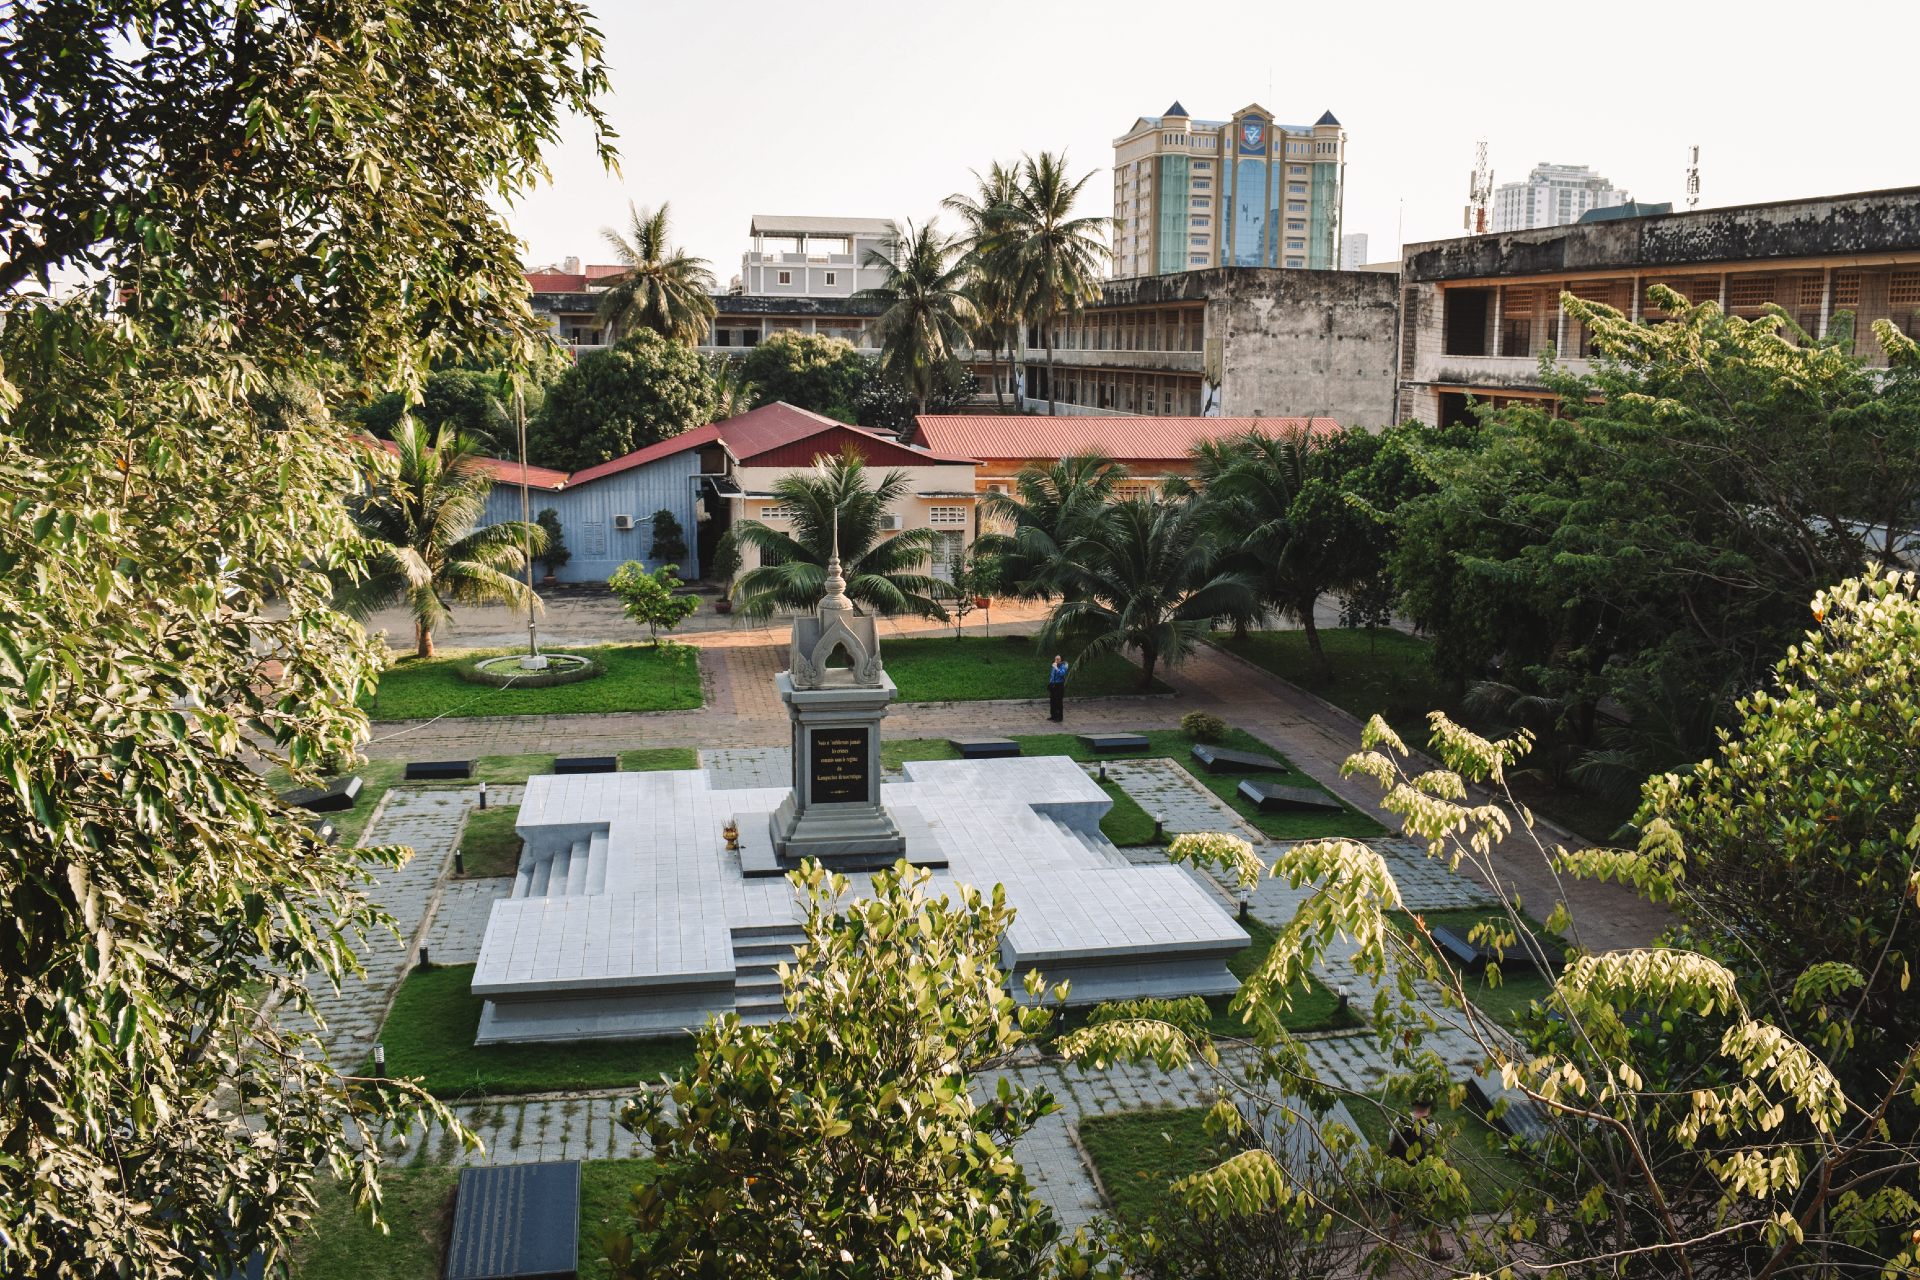 View on the main yard in S21 Tuol Sleng Genocide Museum in Phnom Penh, Cambodia.